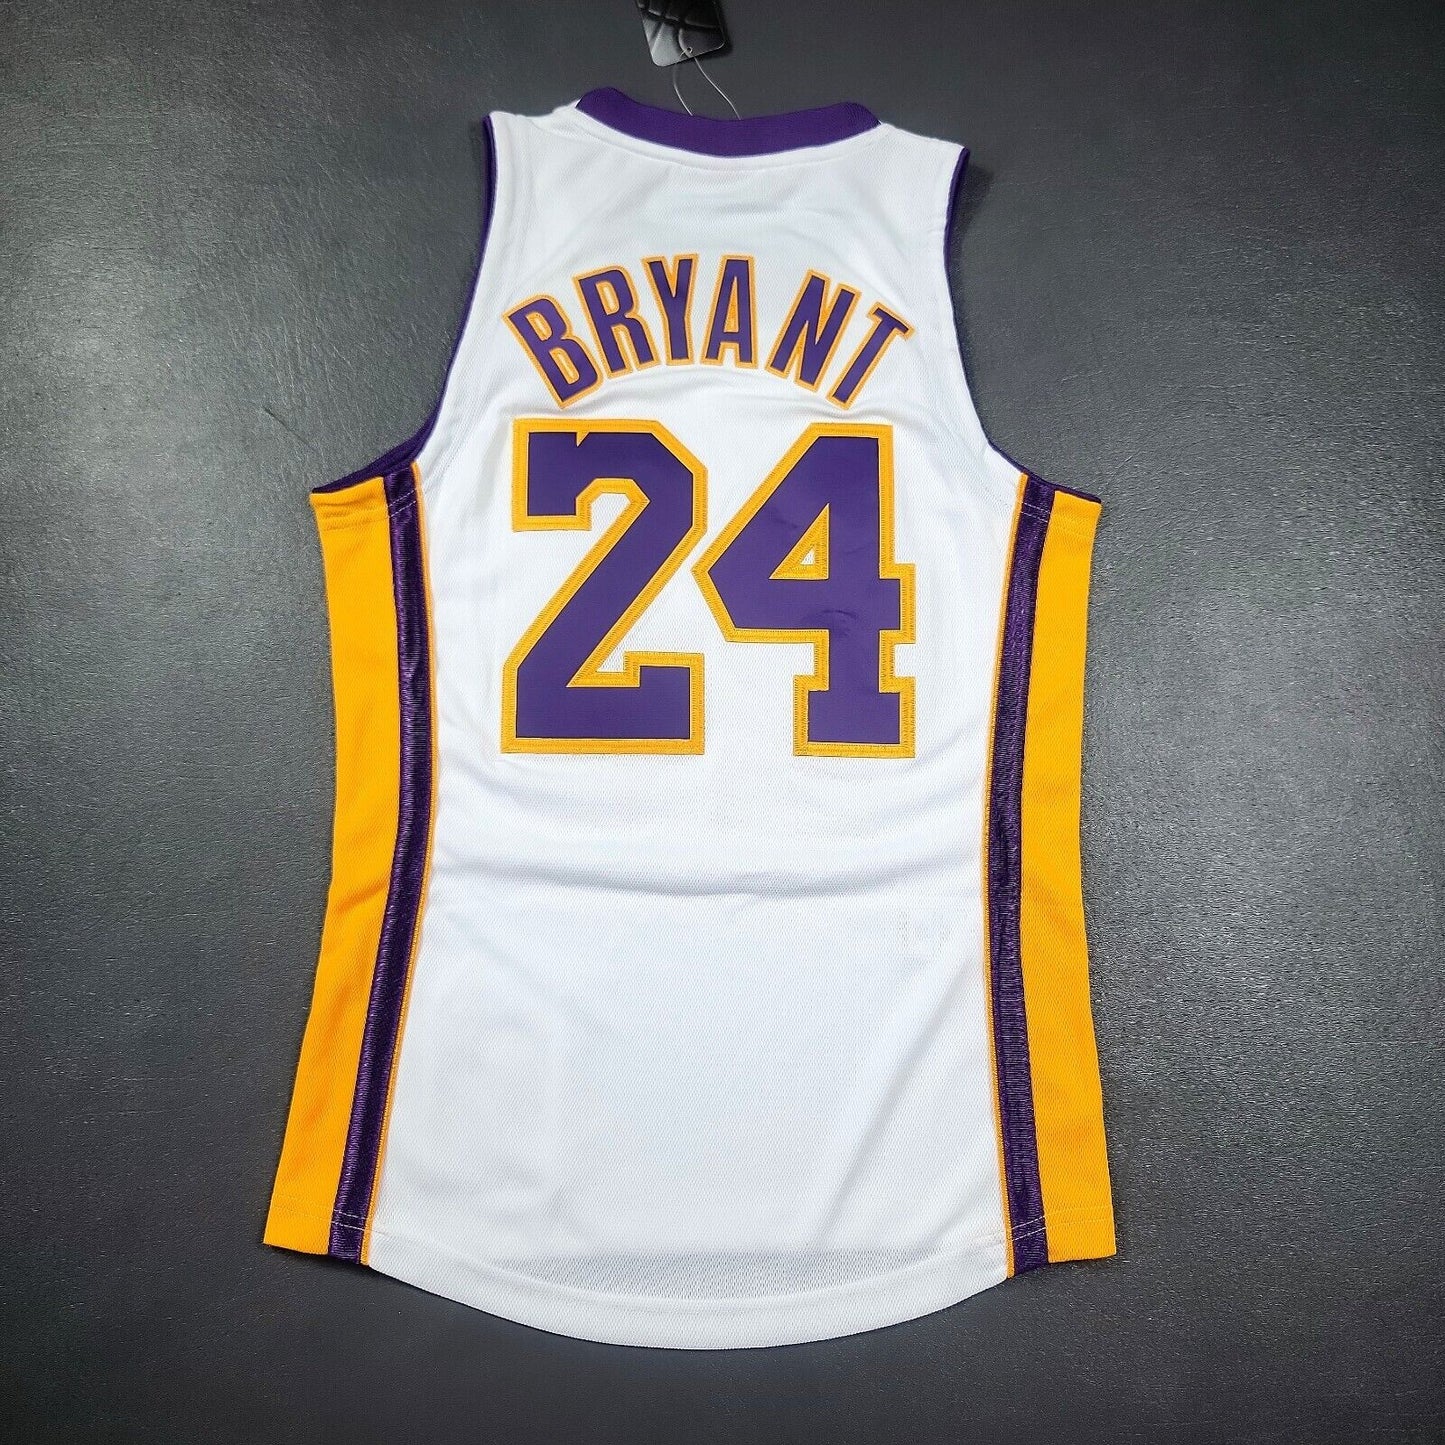 100% Authentic Kobe Bryant Mitchell Ness 09 10 Finals Lakers Jersey Size 36 S